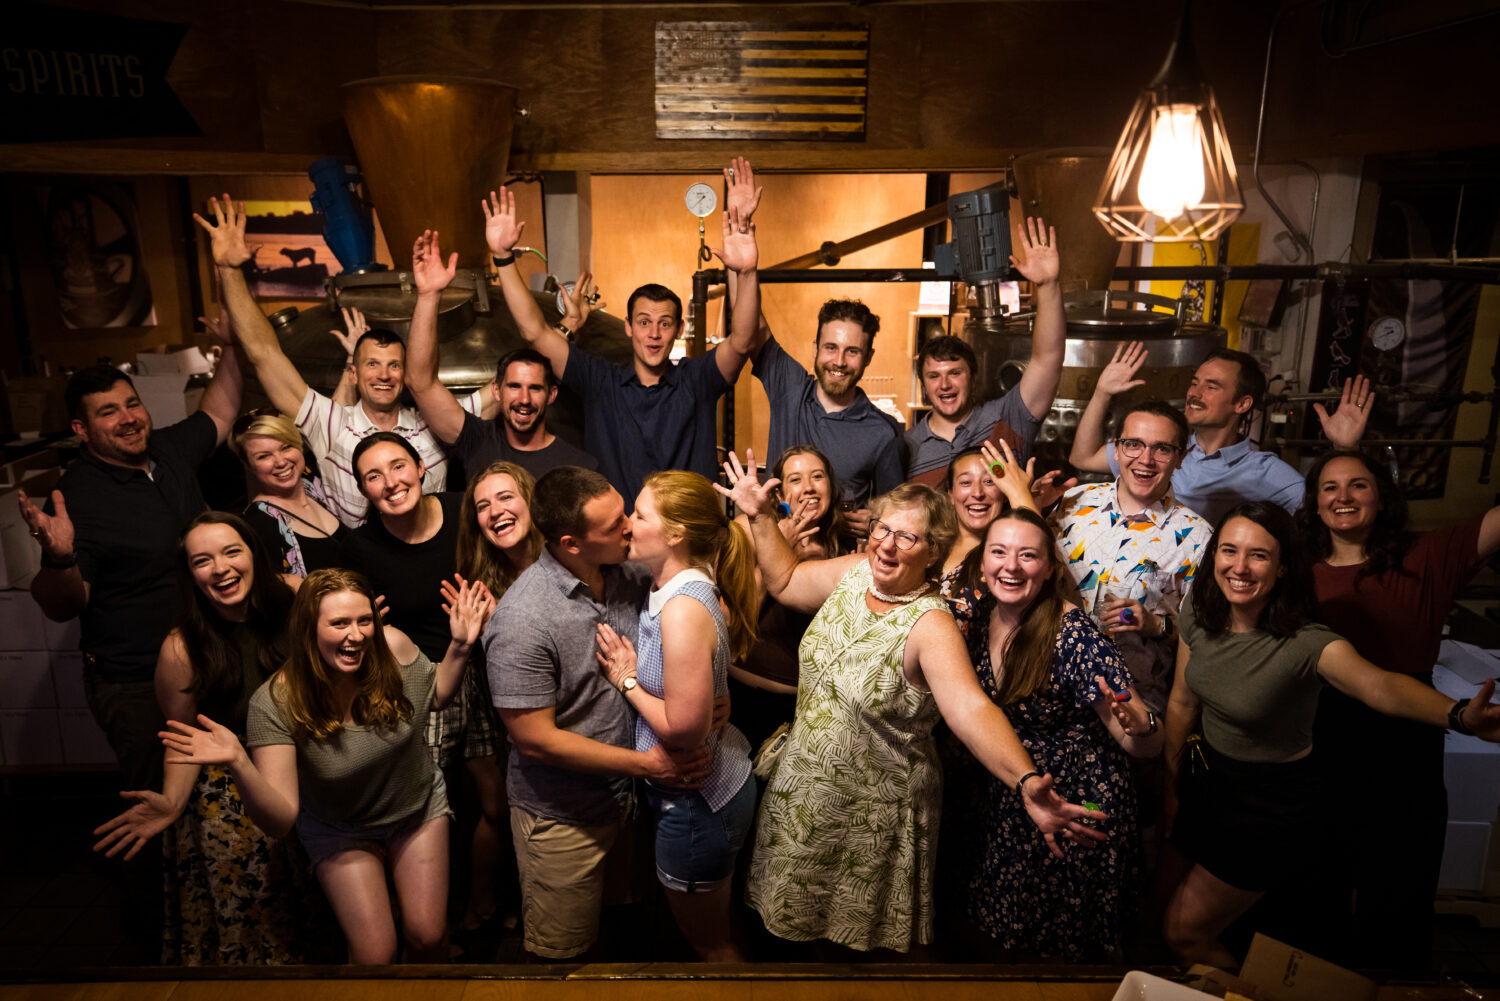 lisa rhinehart, captures this fun image of the couple standing in the middle kissing as they are surrounded by their friends and family at their surprise engagement party after the surprise proposal 